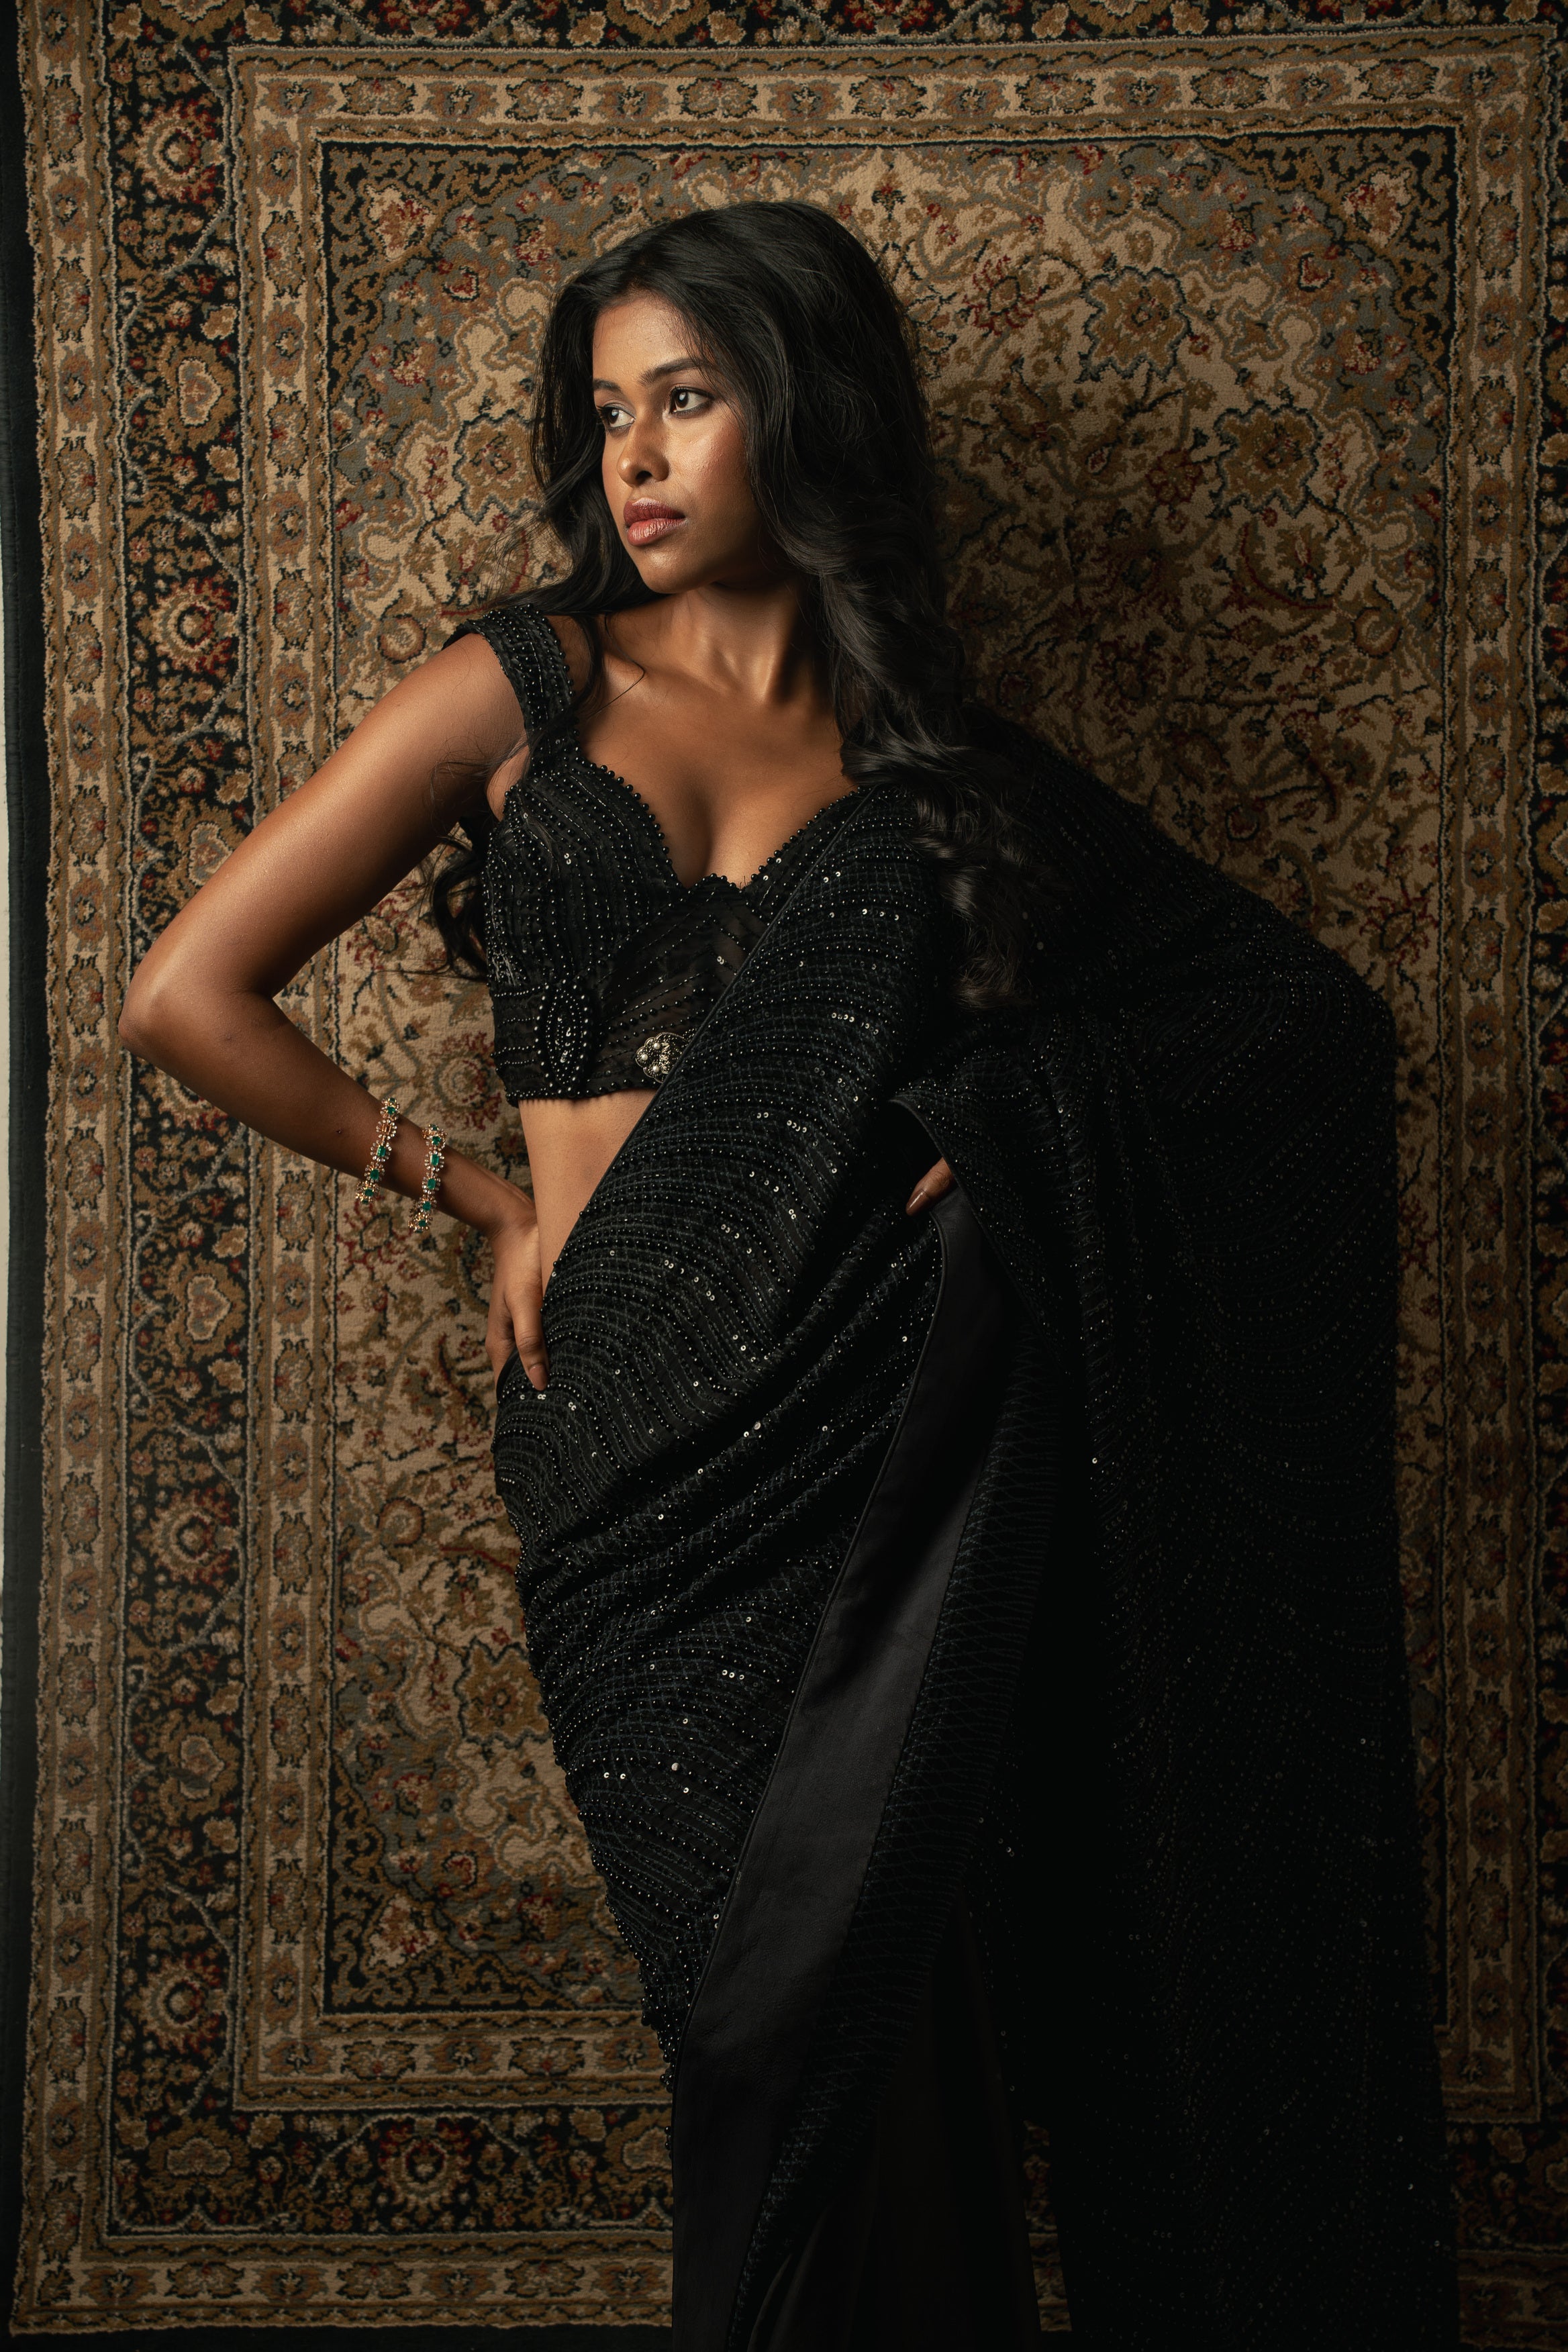 Threaded intricacy meets satin sophistication. This black ensemble is a blend of tradition and contemporary finesse.